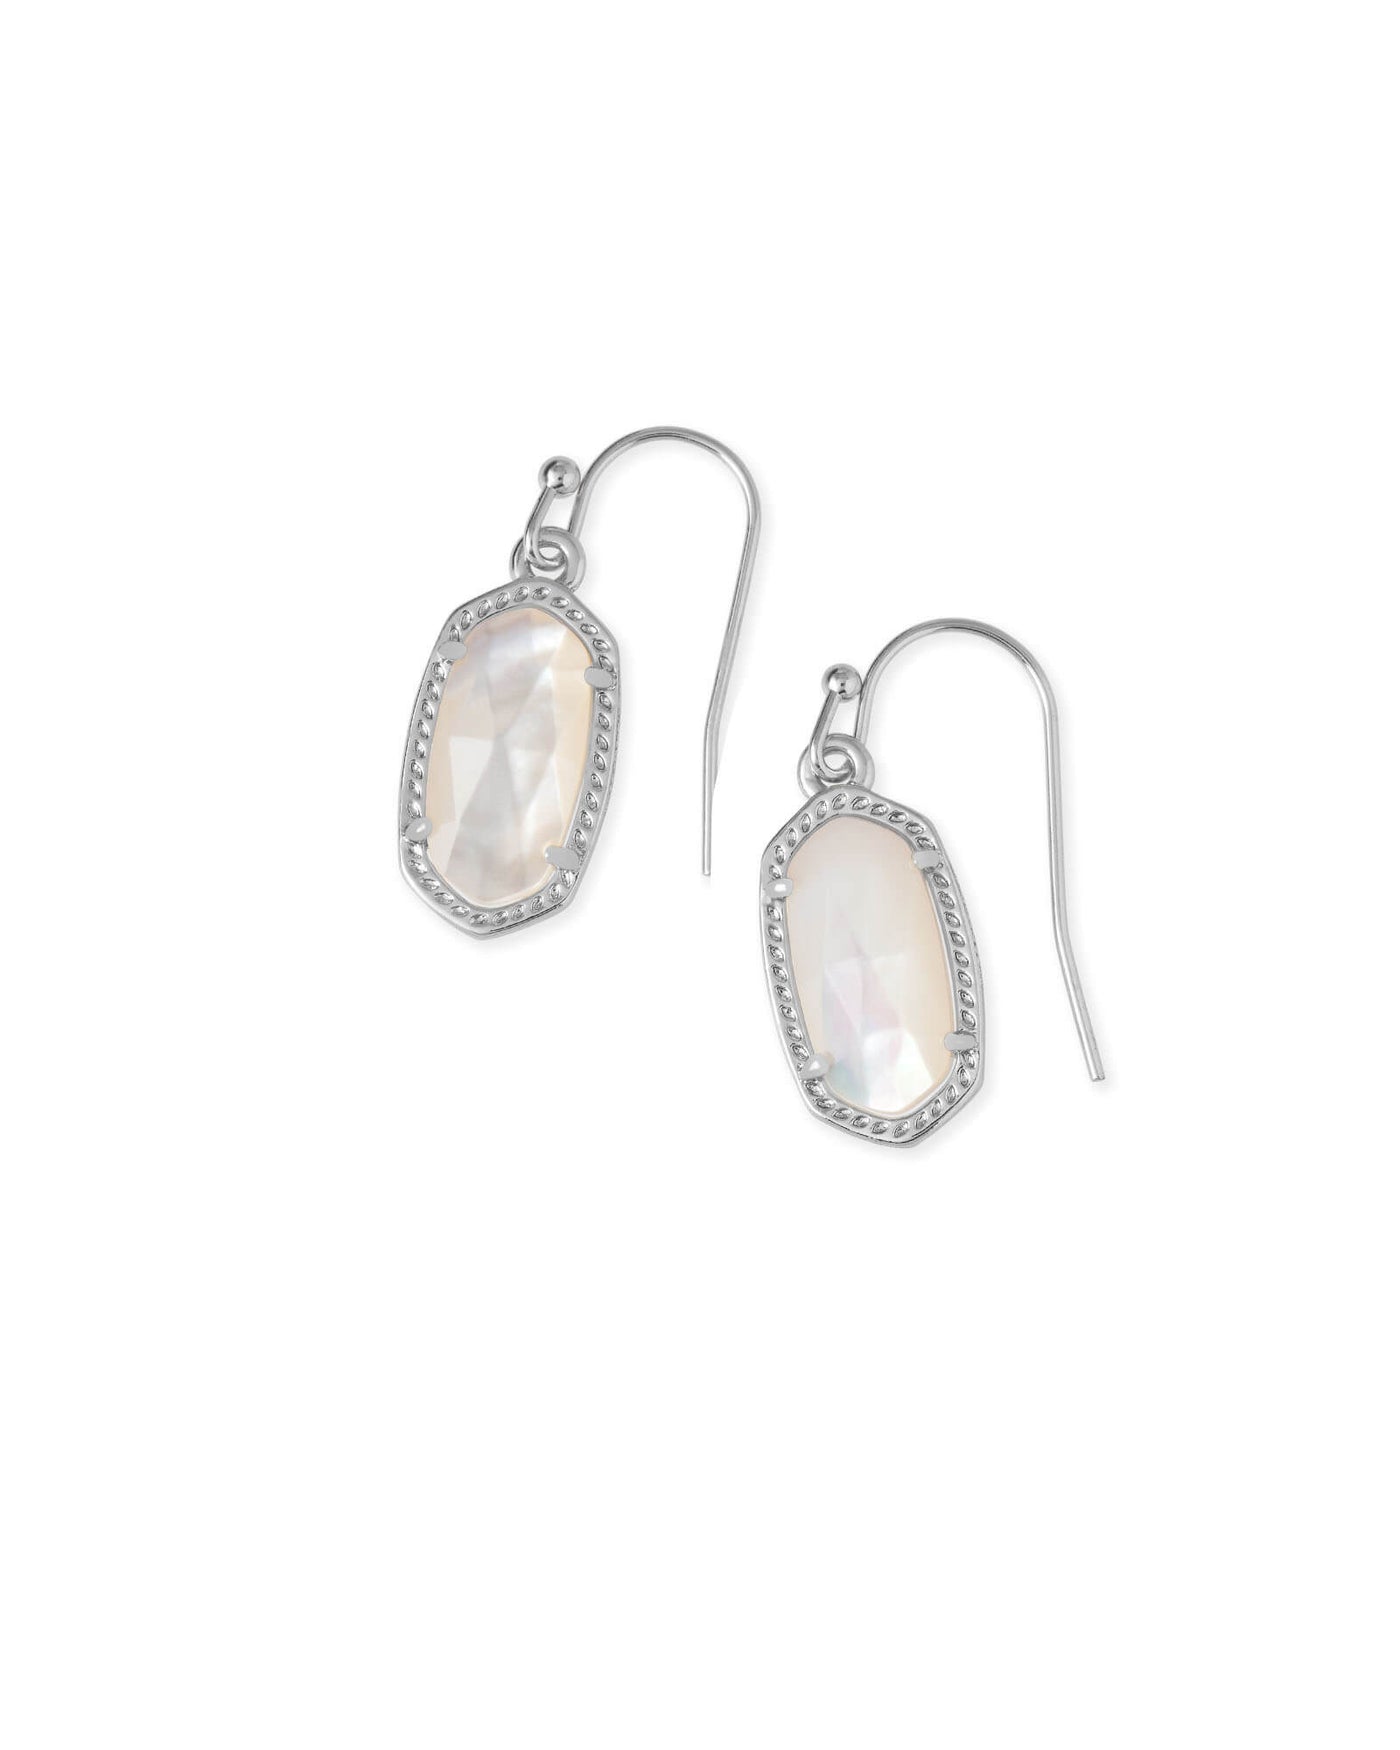 Lee Drop Earrings Silver Mother-of-Pearl on white background, front view.